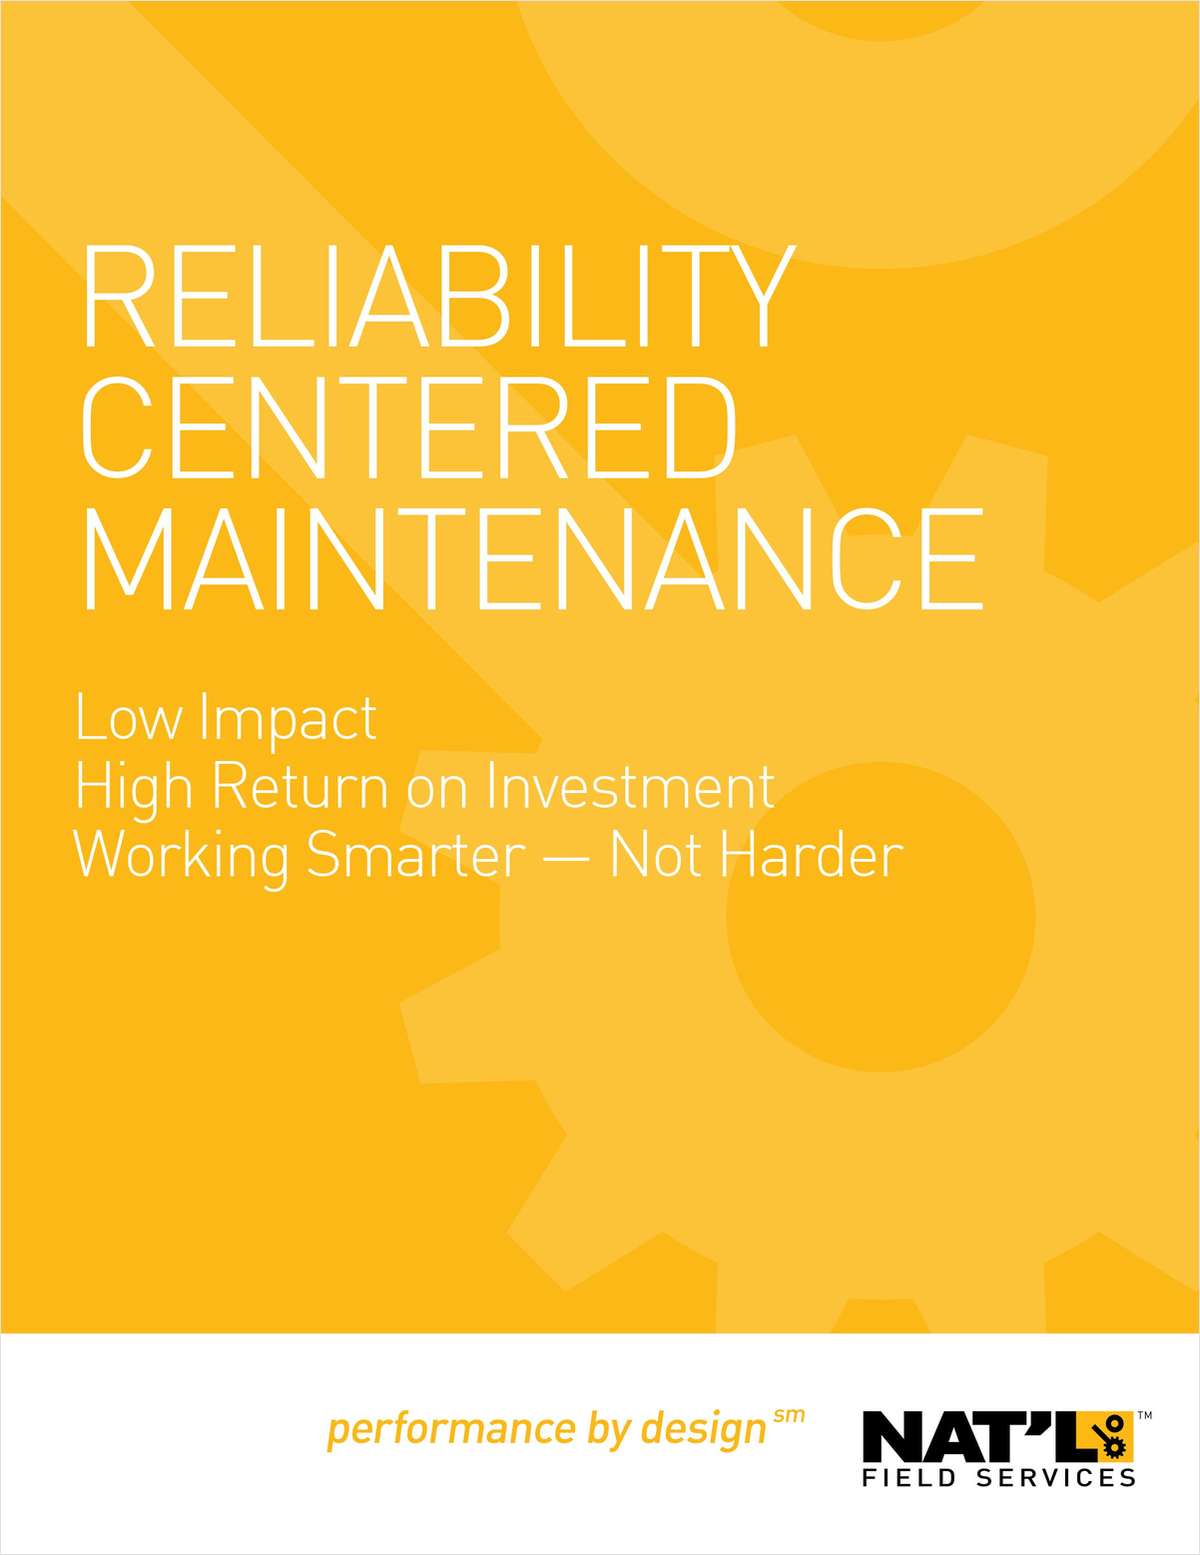 Reliability Centered Maintenance - Low Impact, High Return on Investment